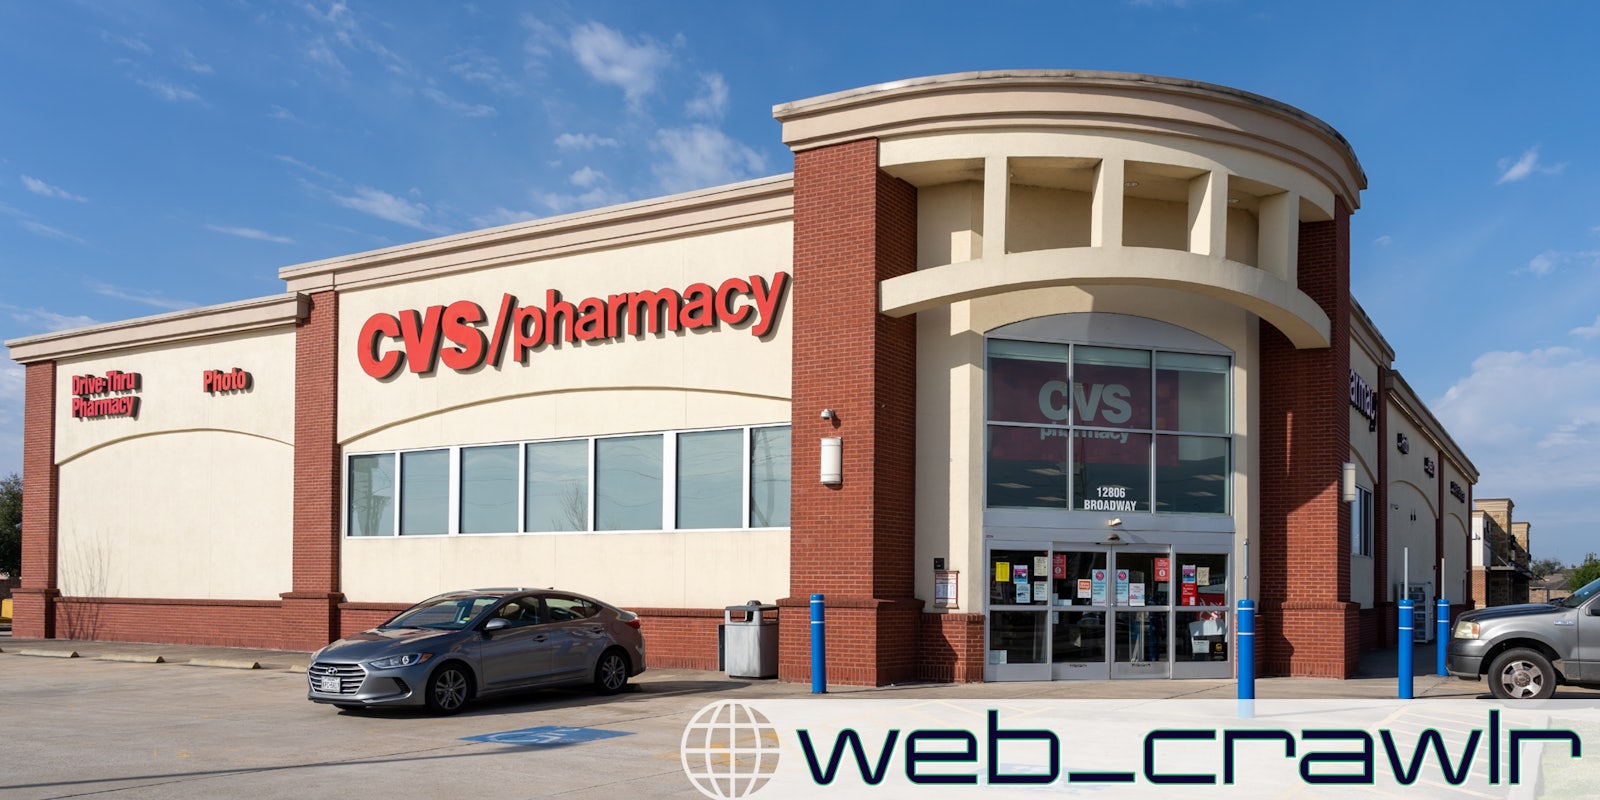 A CVS store. The Daily Dot newsletter web_crawlr logo is in the bottom right corner.